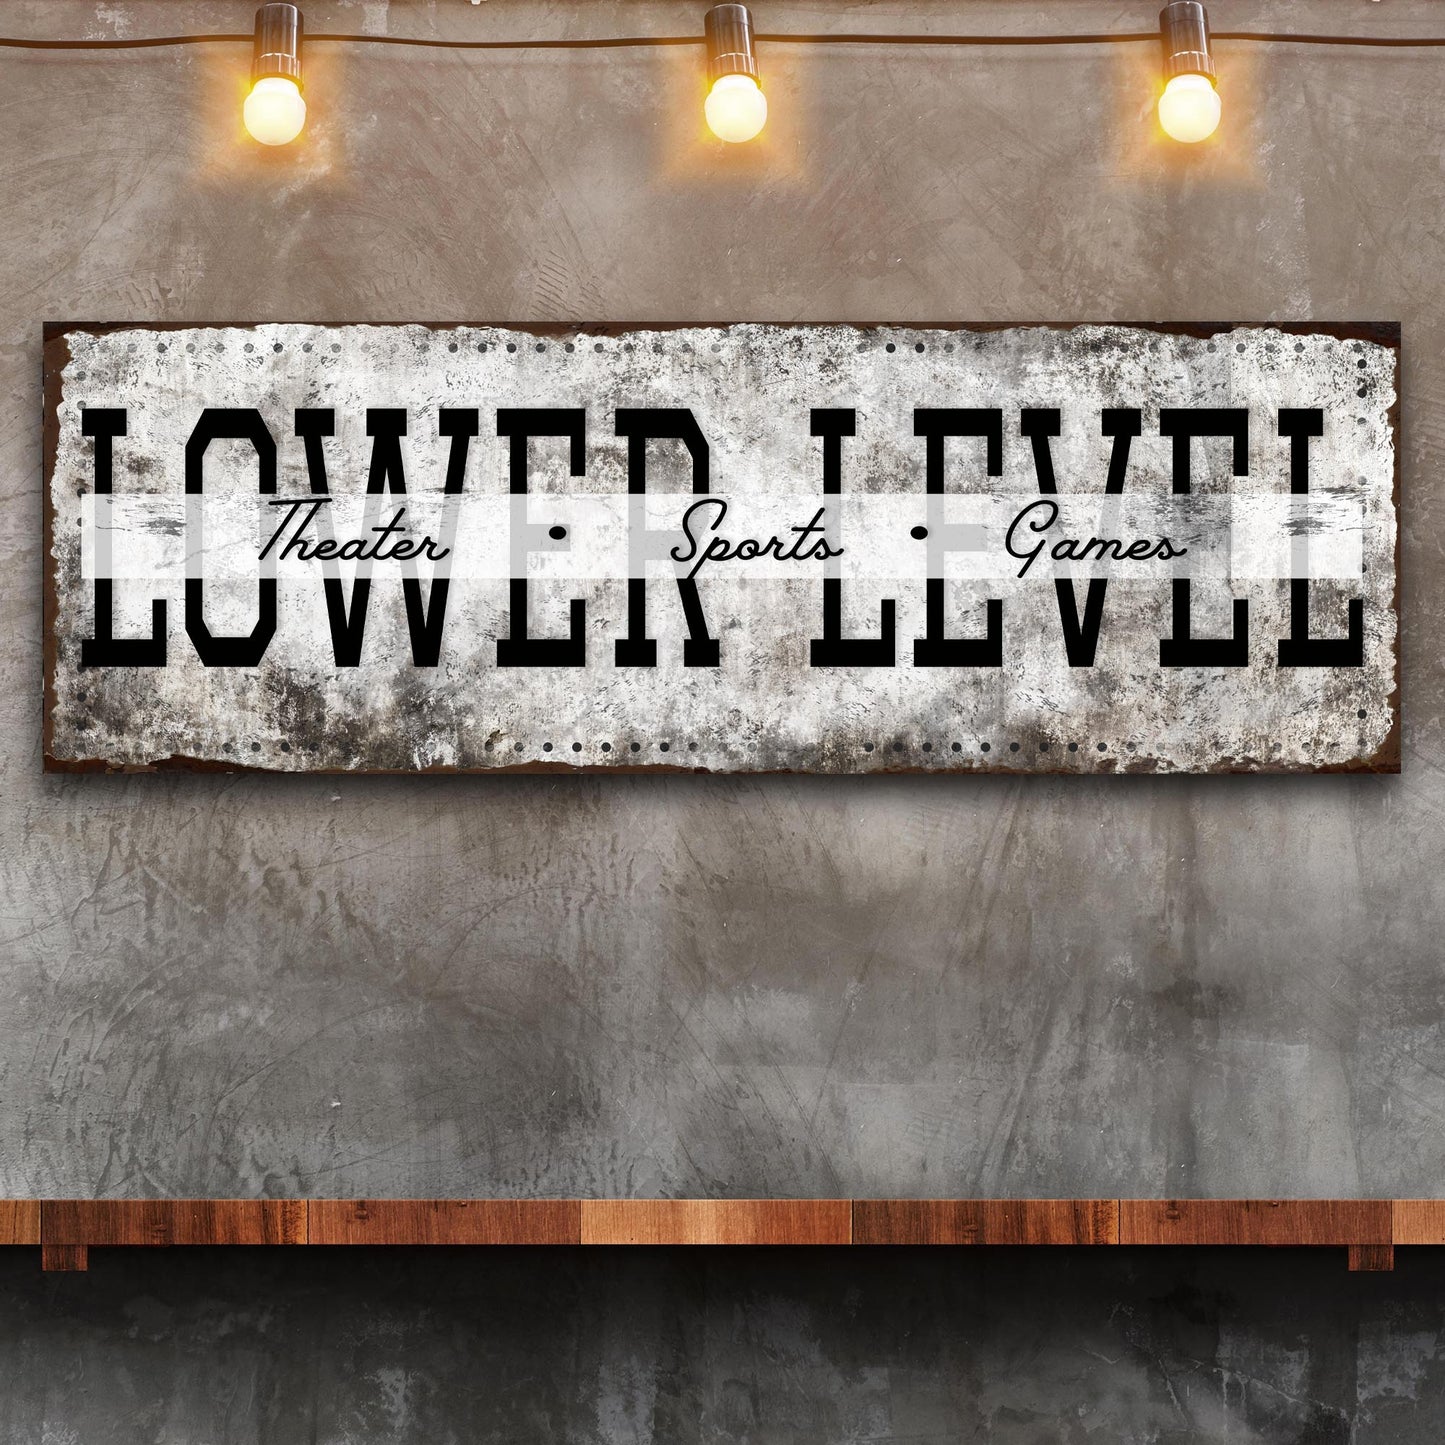 Lower Level Theater Sports Games Basement Bar Sign - Image by Tailored Canvases